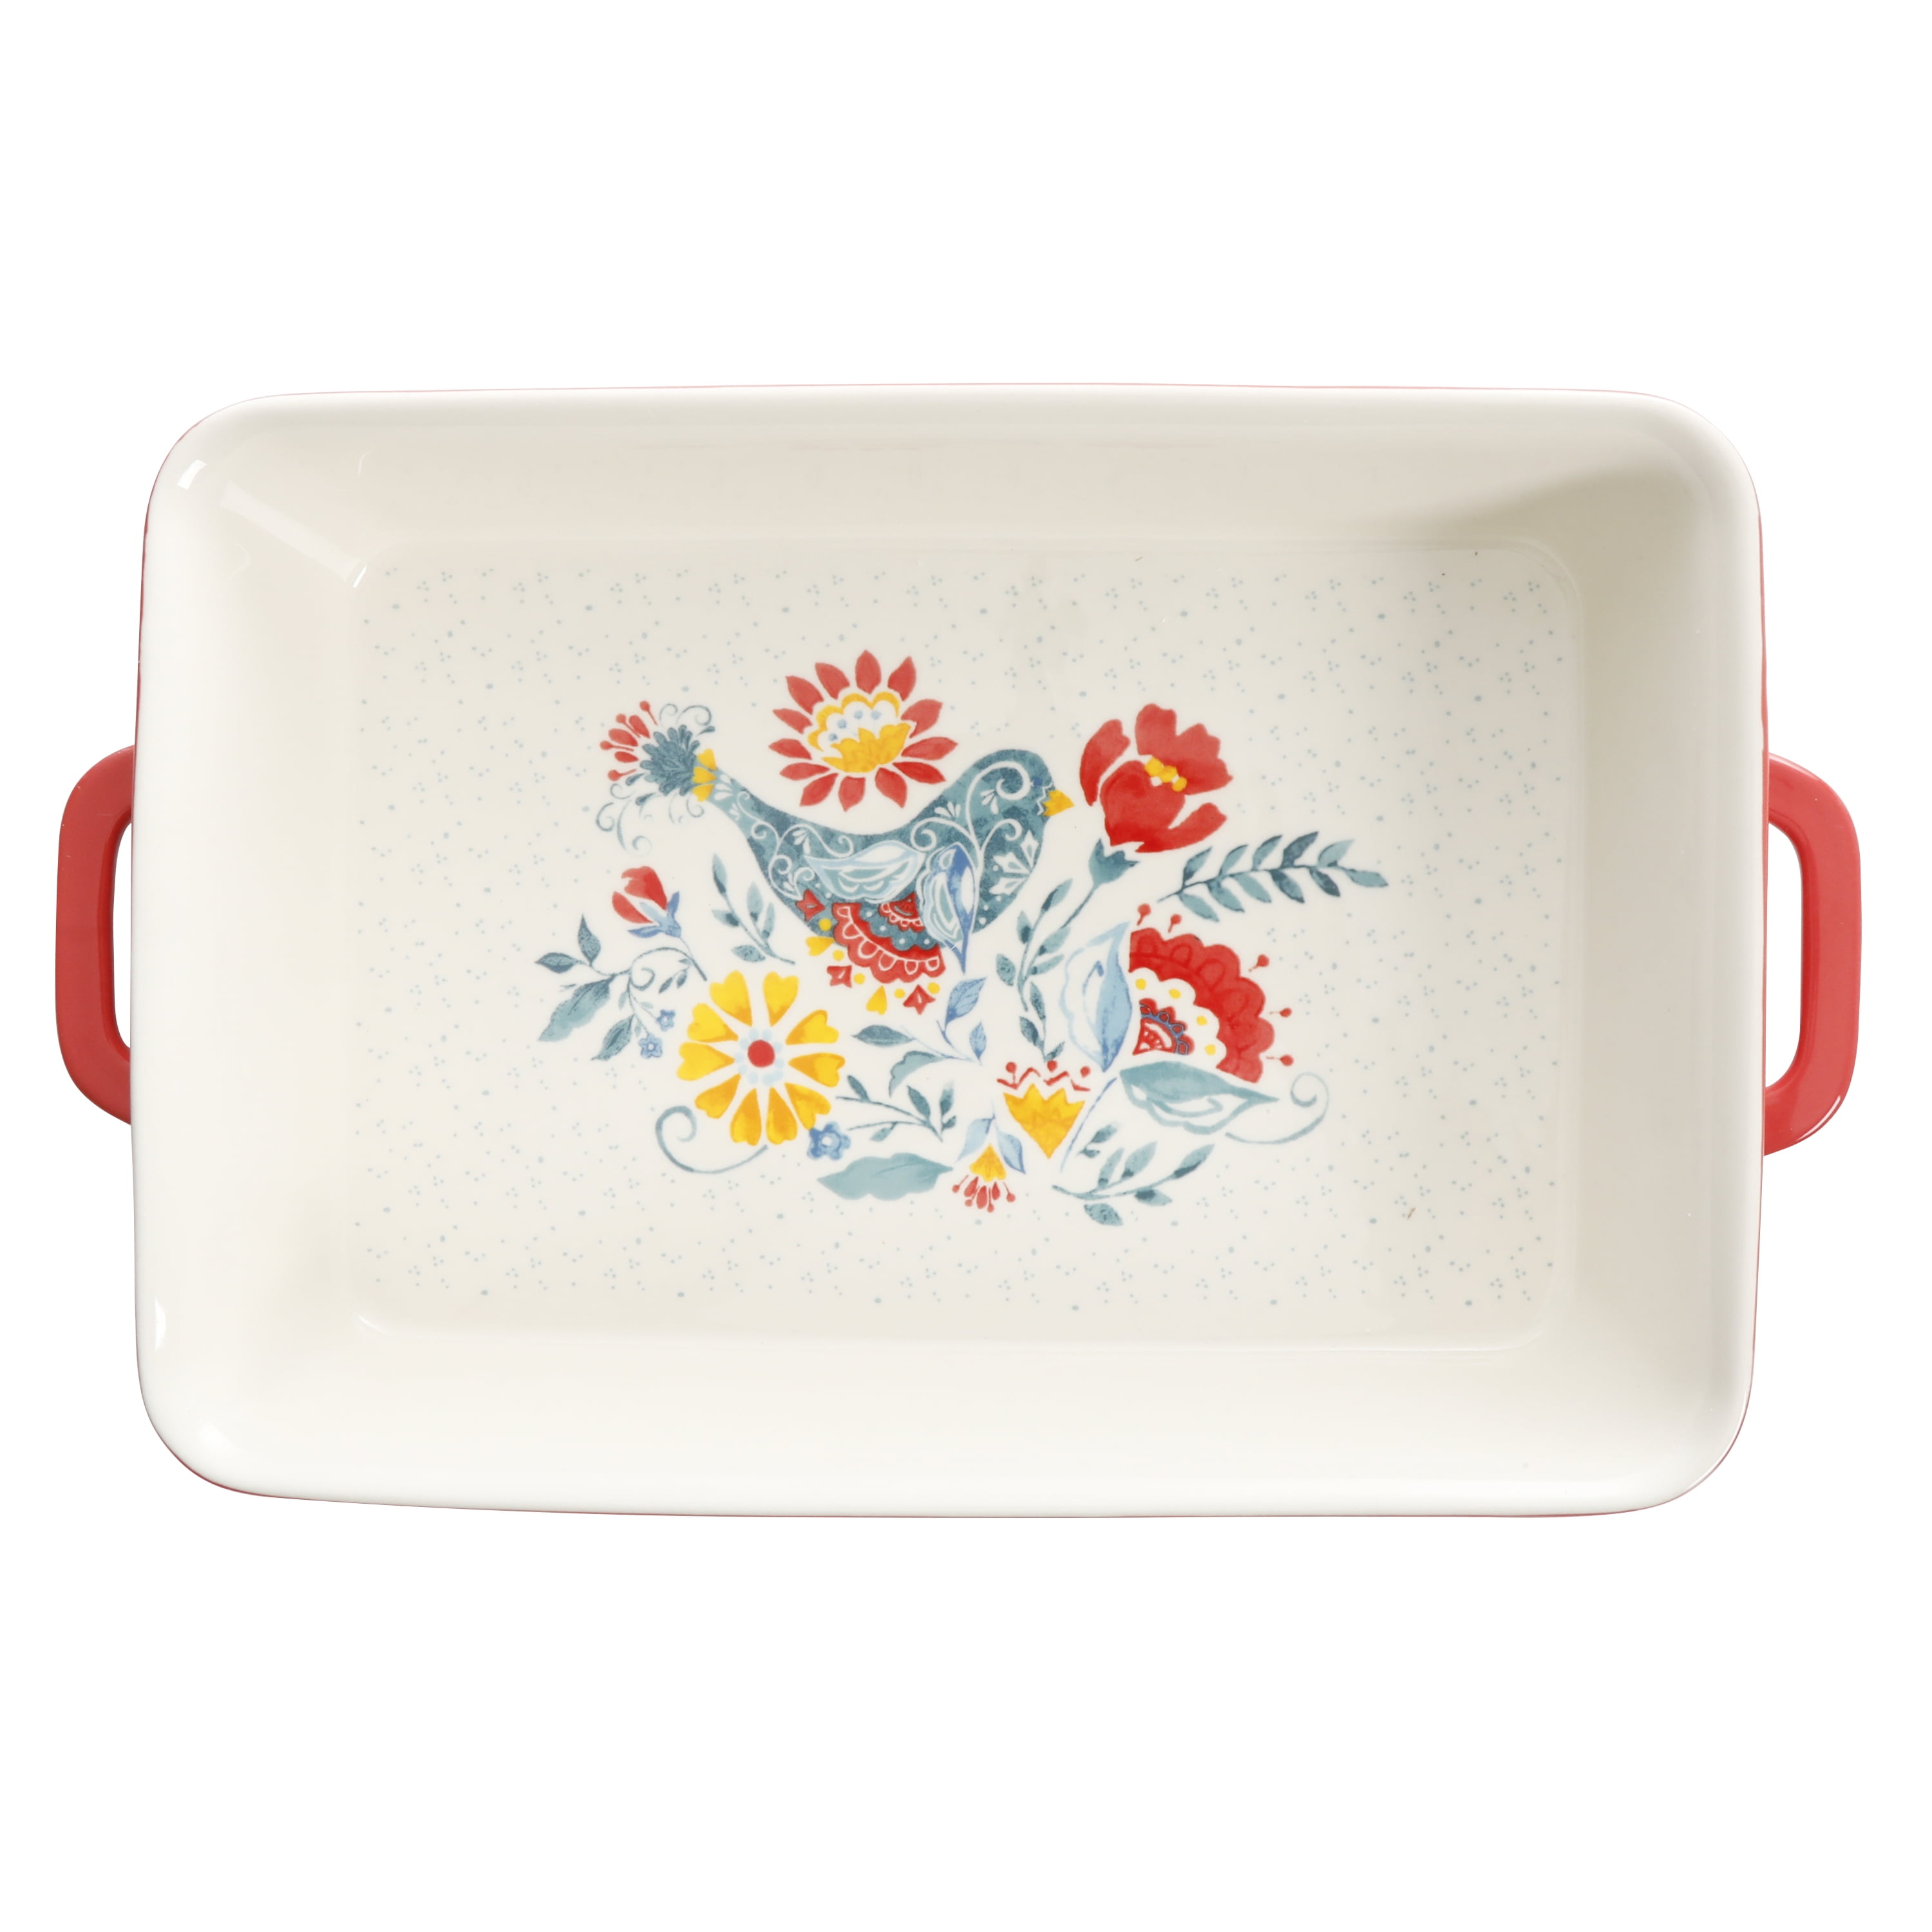 The Pioneer Woman Fancy Flourish Rectangular Stoneware Casserole with Lid, Red, Size: 2 Piece